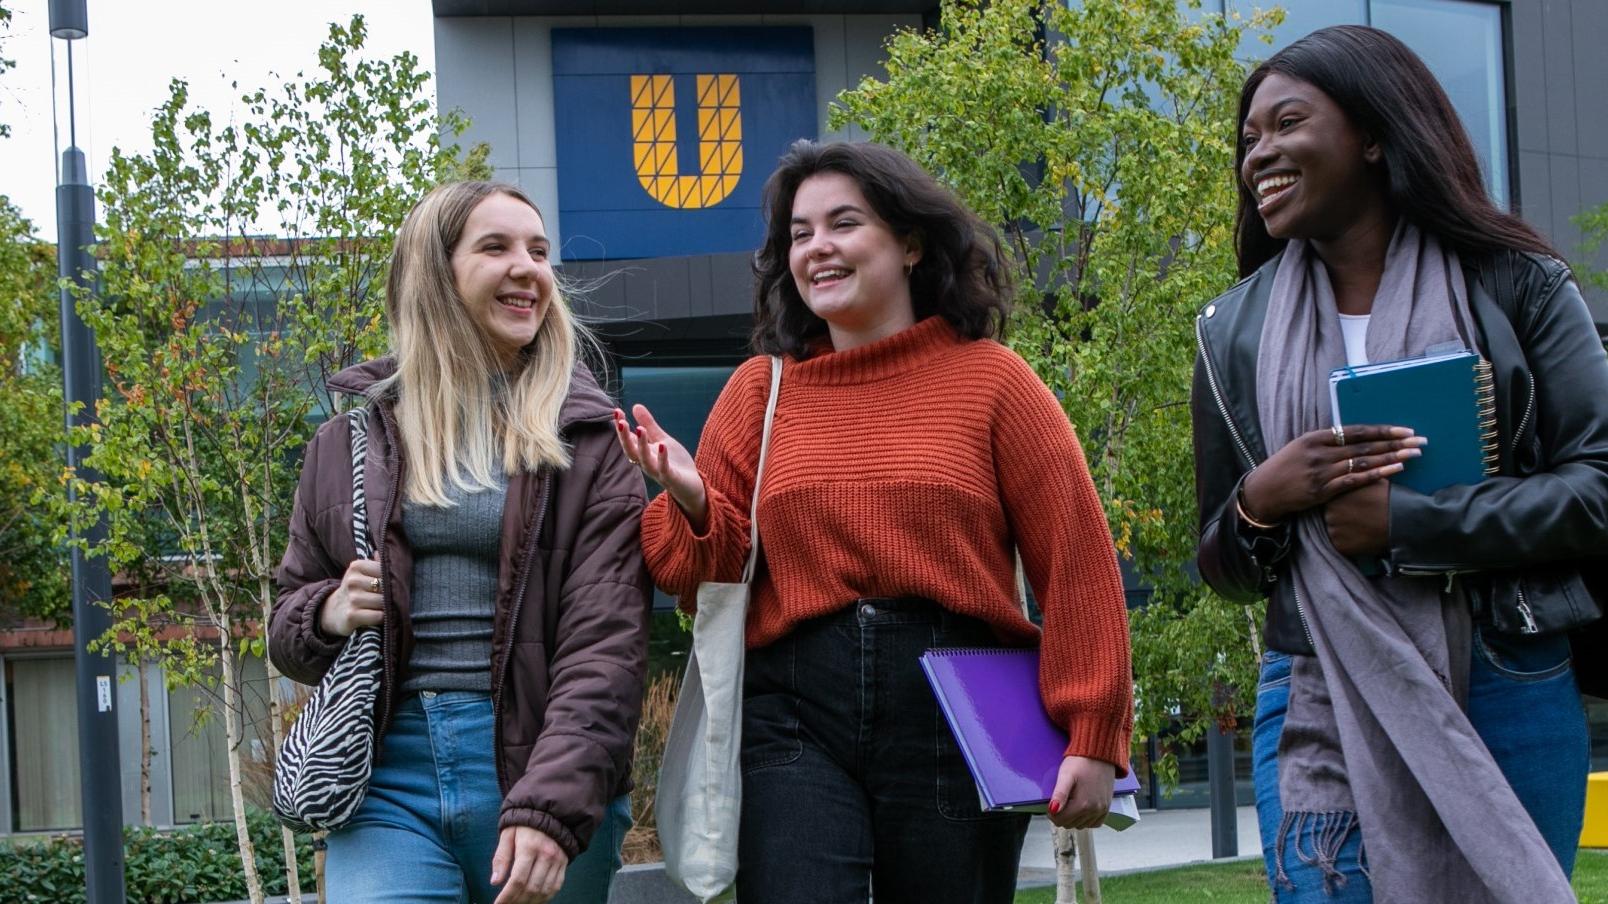 An image showing three students chatting on DCU's Glasnevin campus